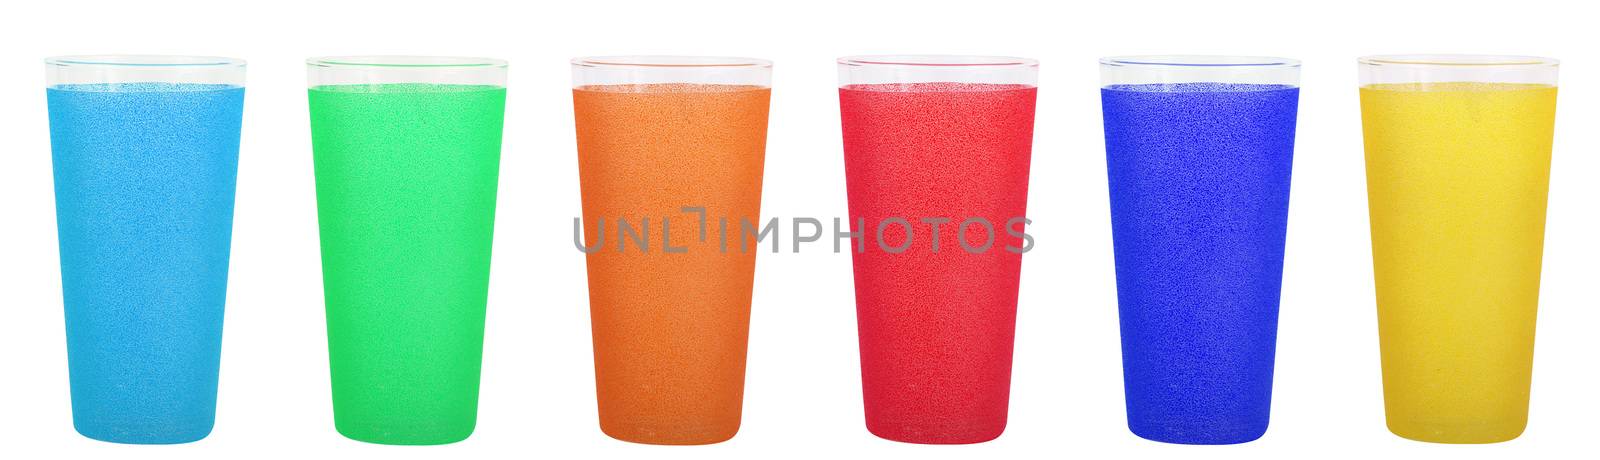 coloured glass glasses on a white background by photobeps